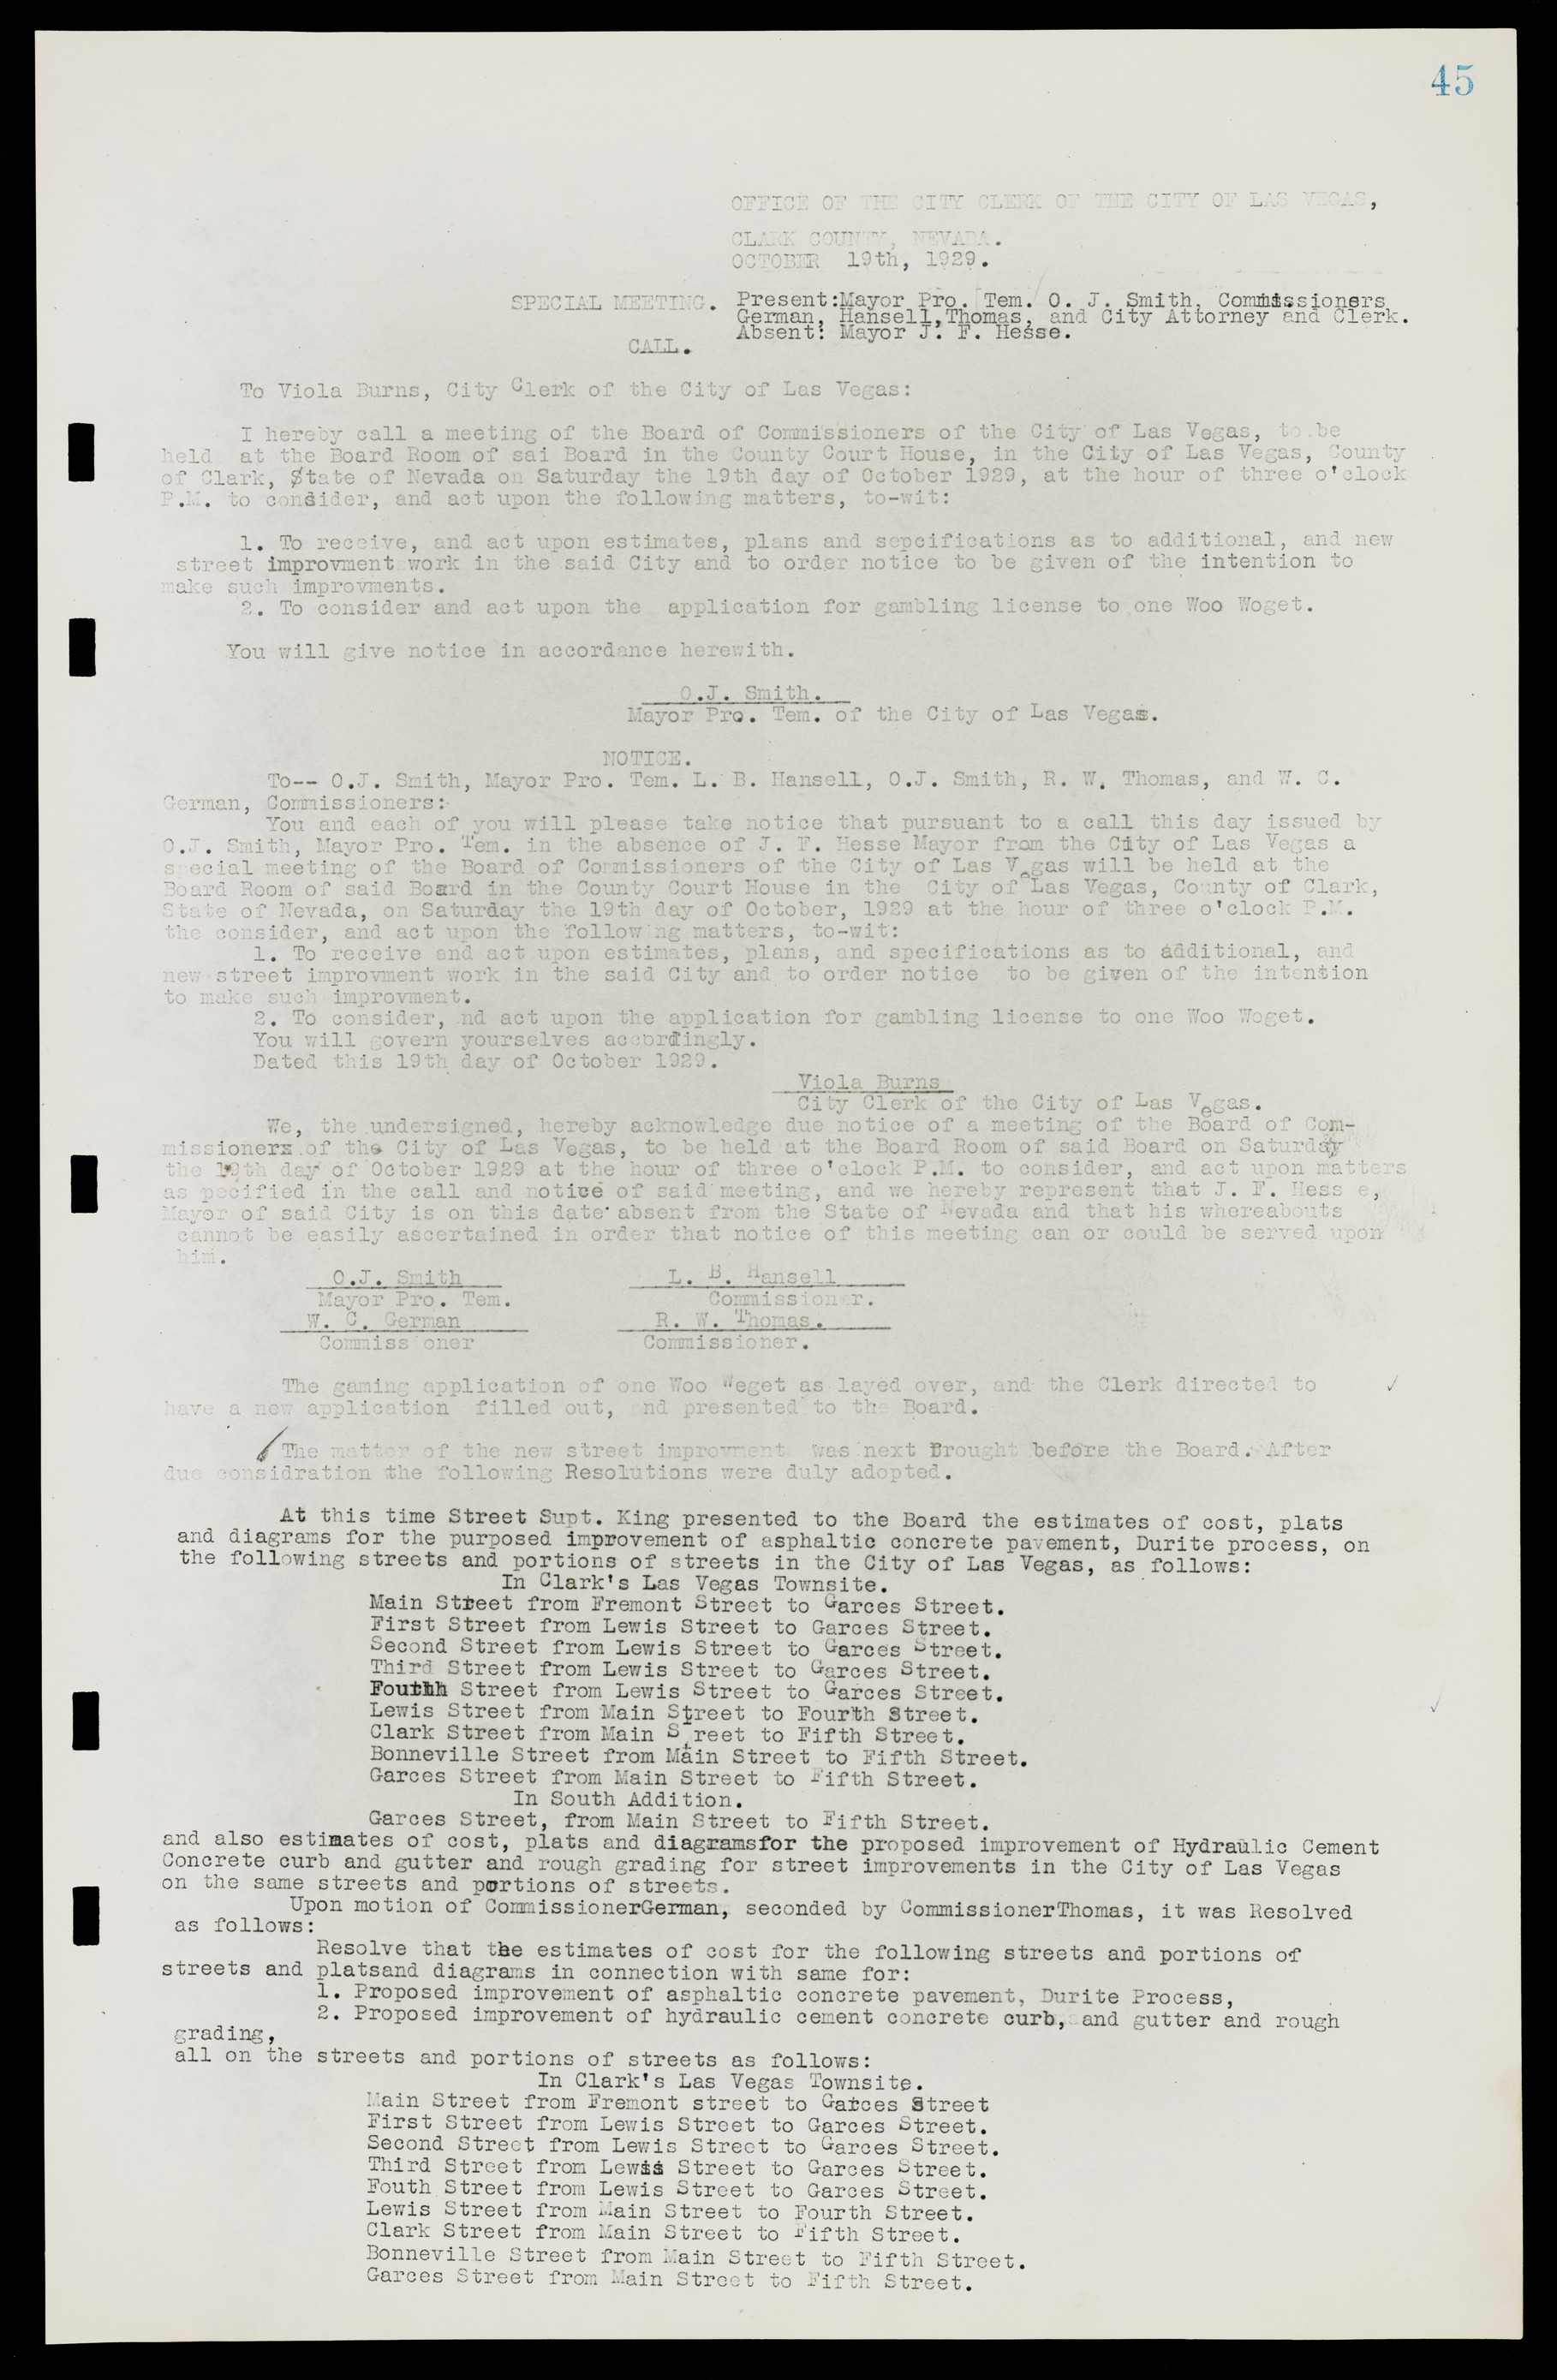 Las Vegas City Commission Minutes, May 14, 1929 to February 11, 1937, lvc000003-51